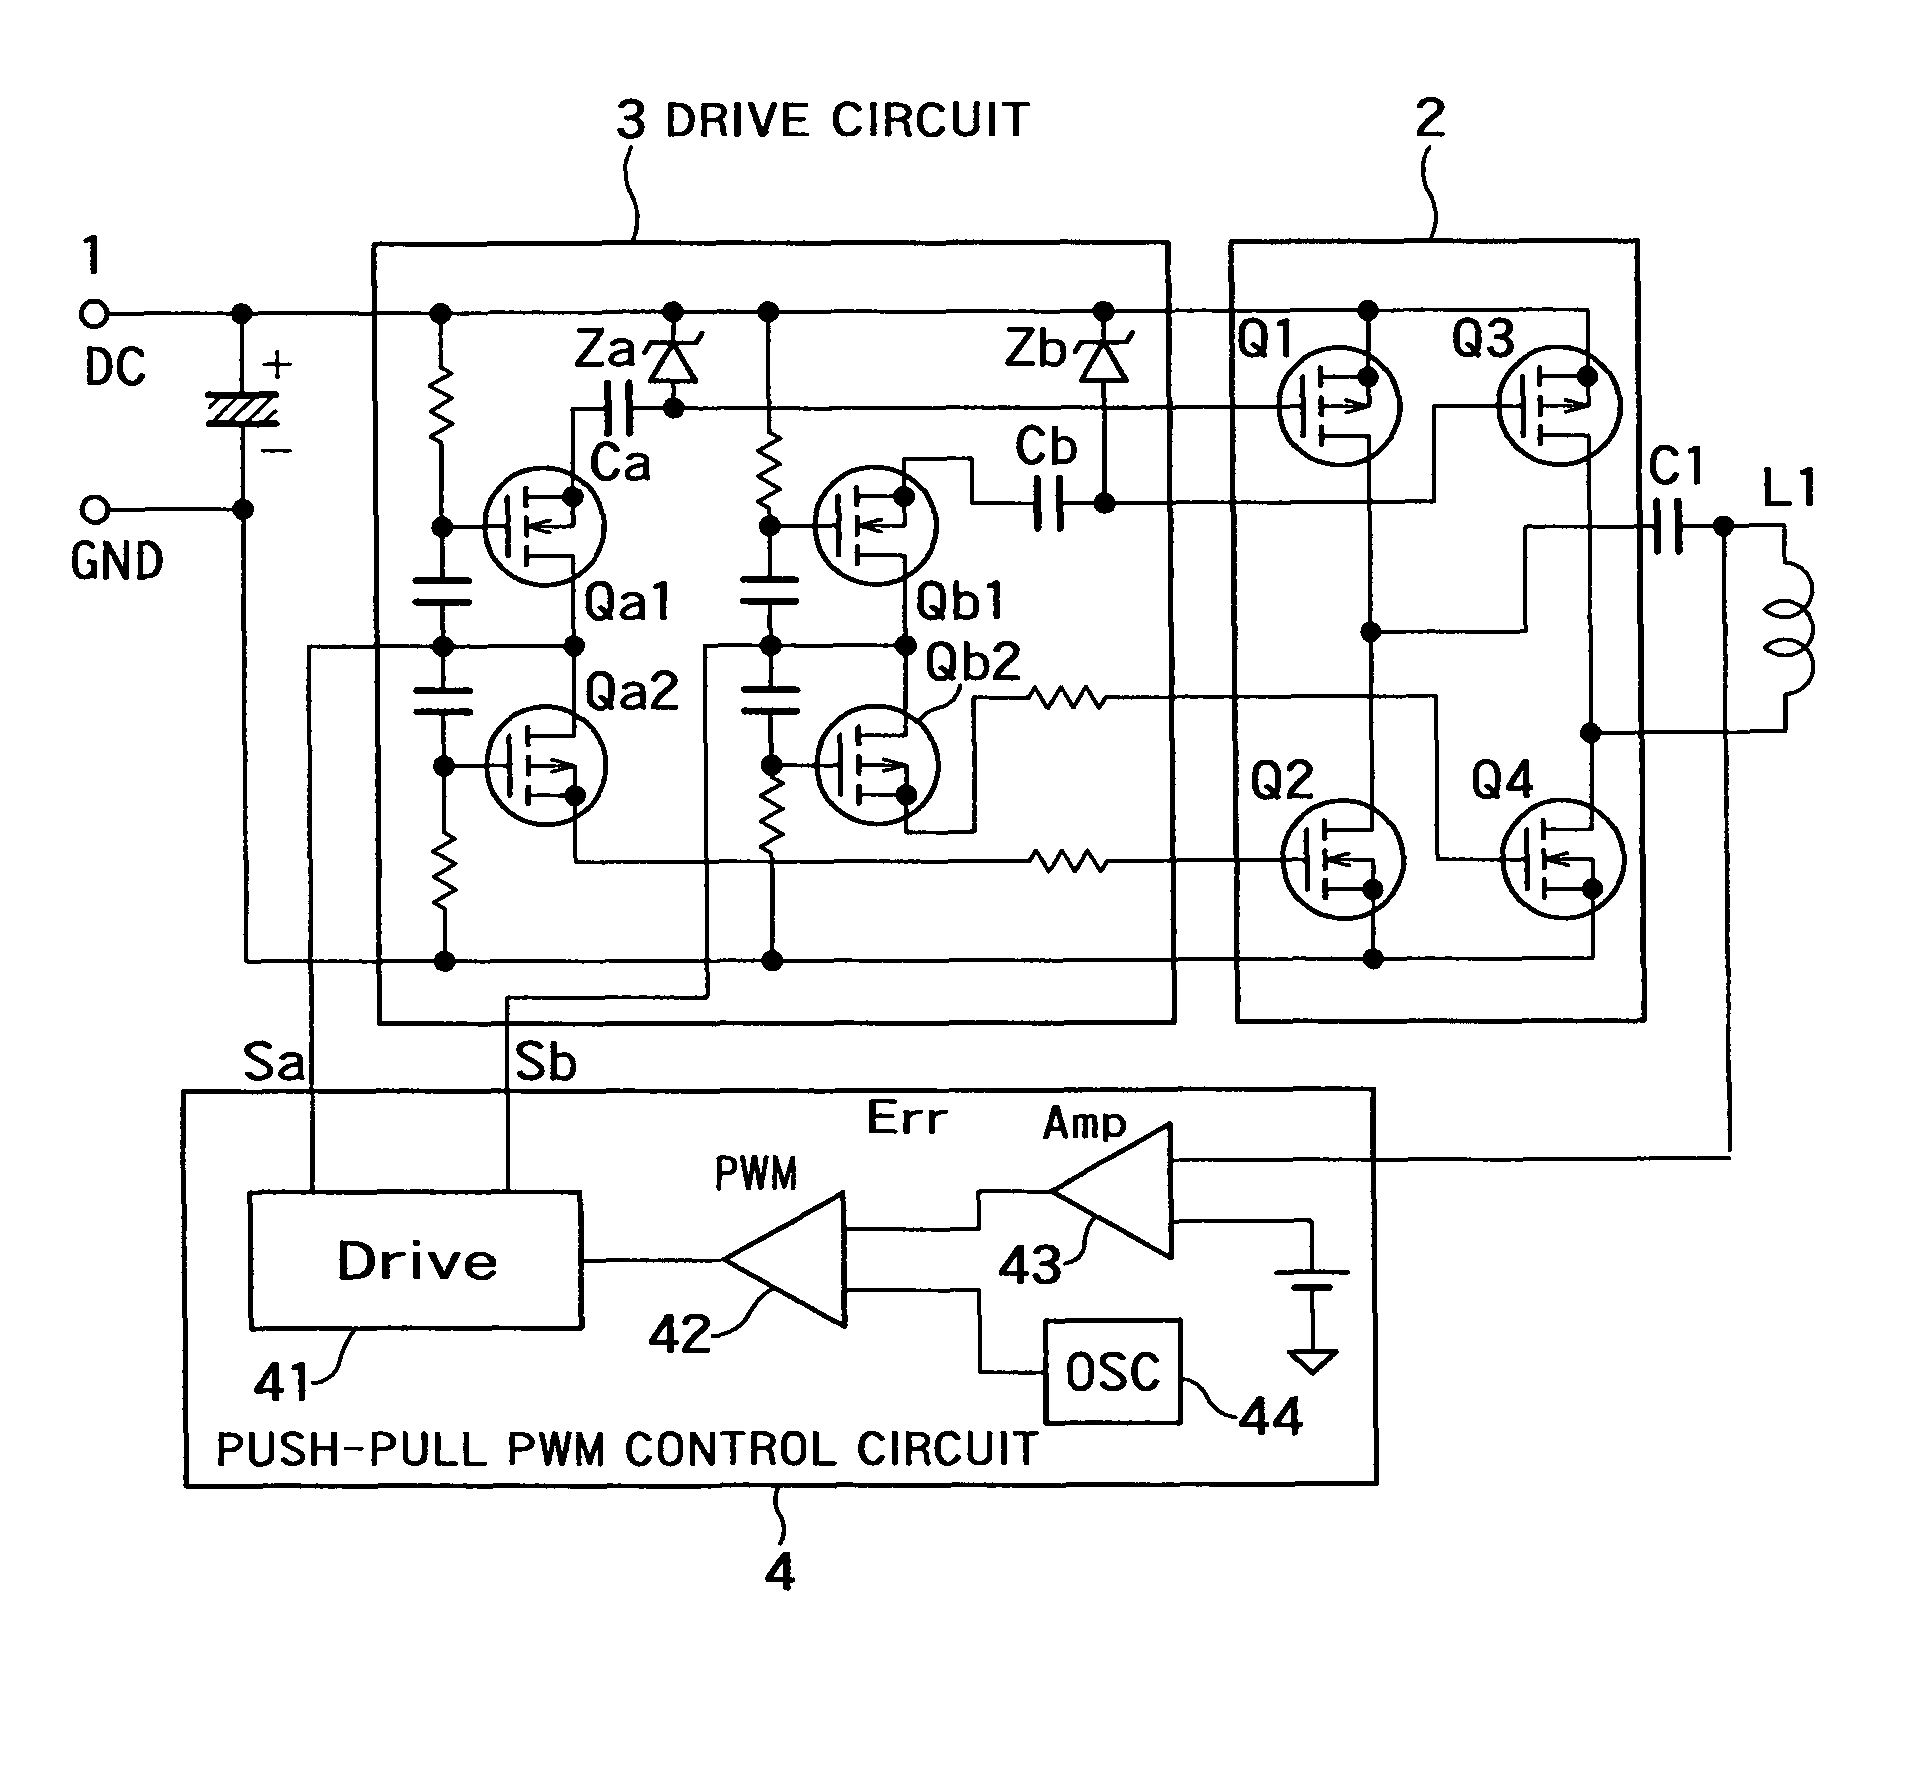 Non-contact electric power transmission circuit